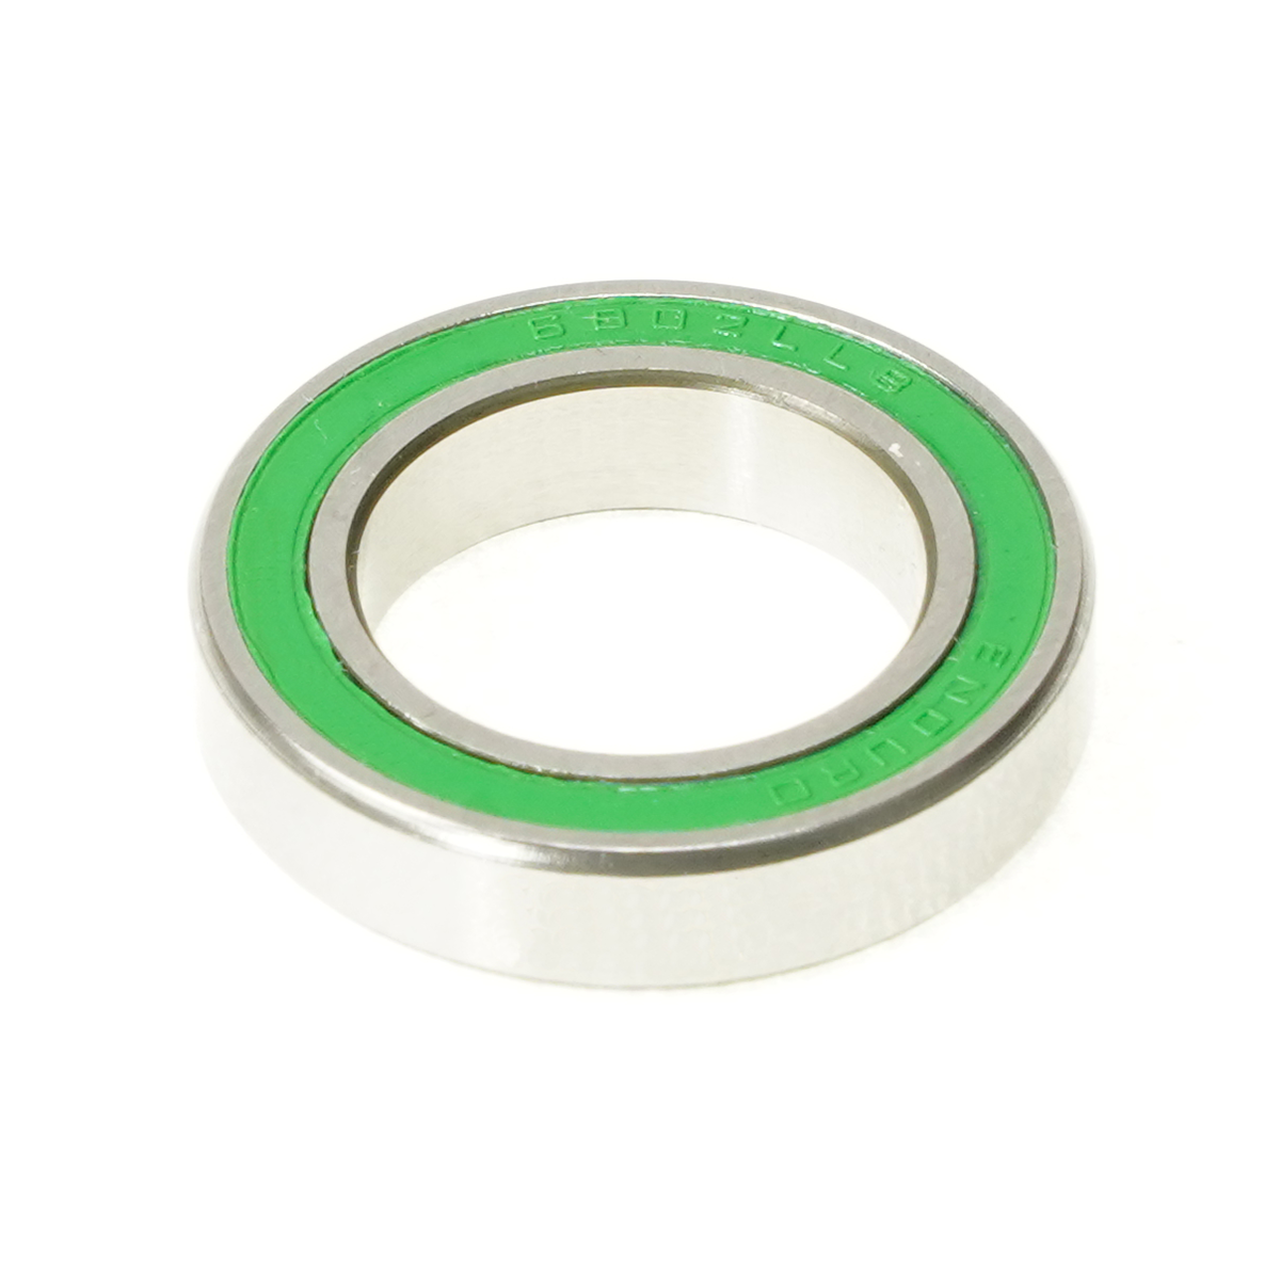 Enduro S6802 LLB - Stainless Steel Radial Bearing (C3 Clearance) - 15mm x 24mm x 5mm